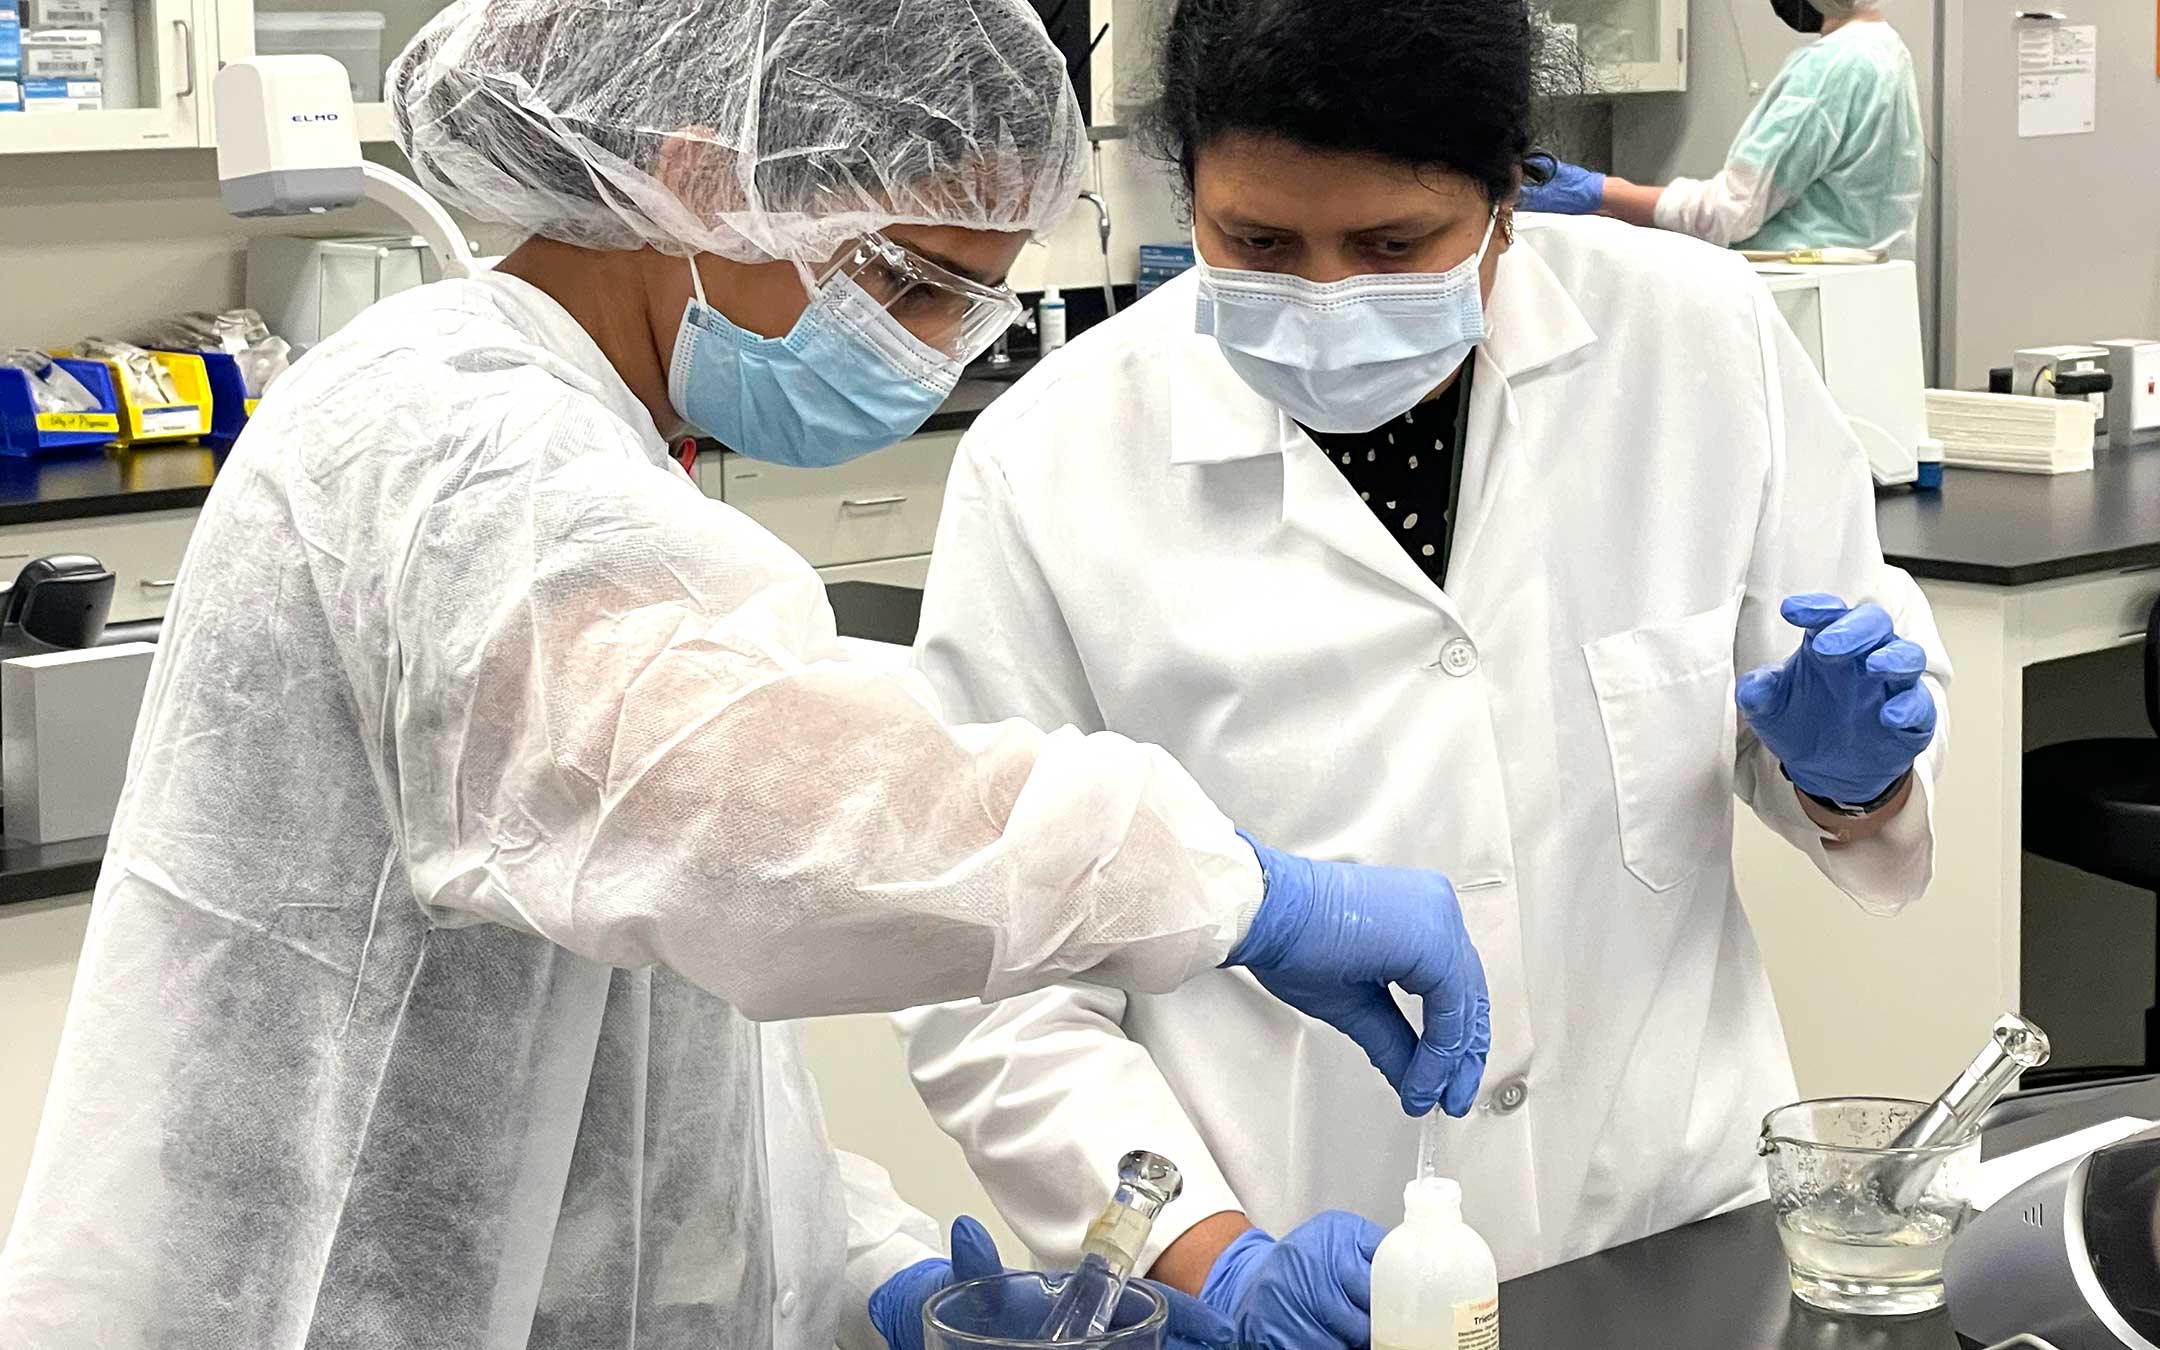 A member of the Summer Pharmacy Academy learns about compounding from an instructor